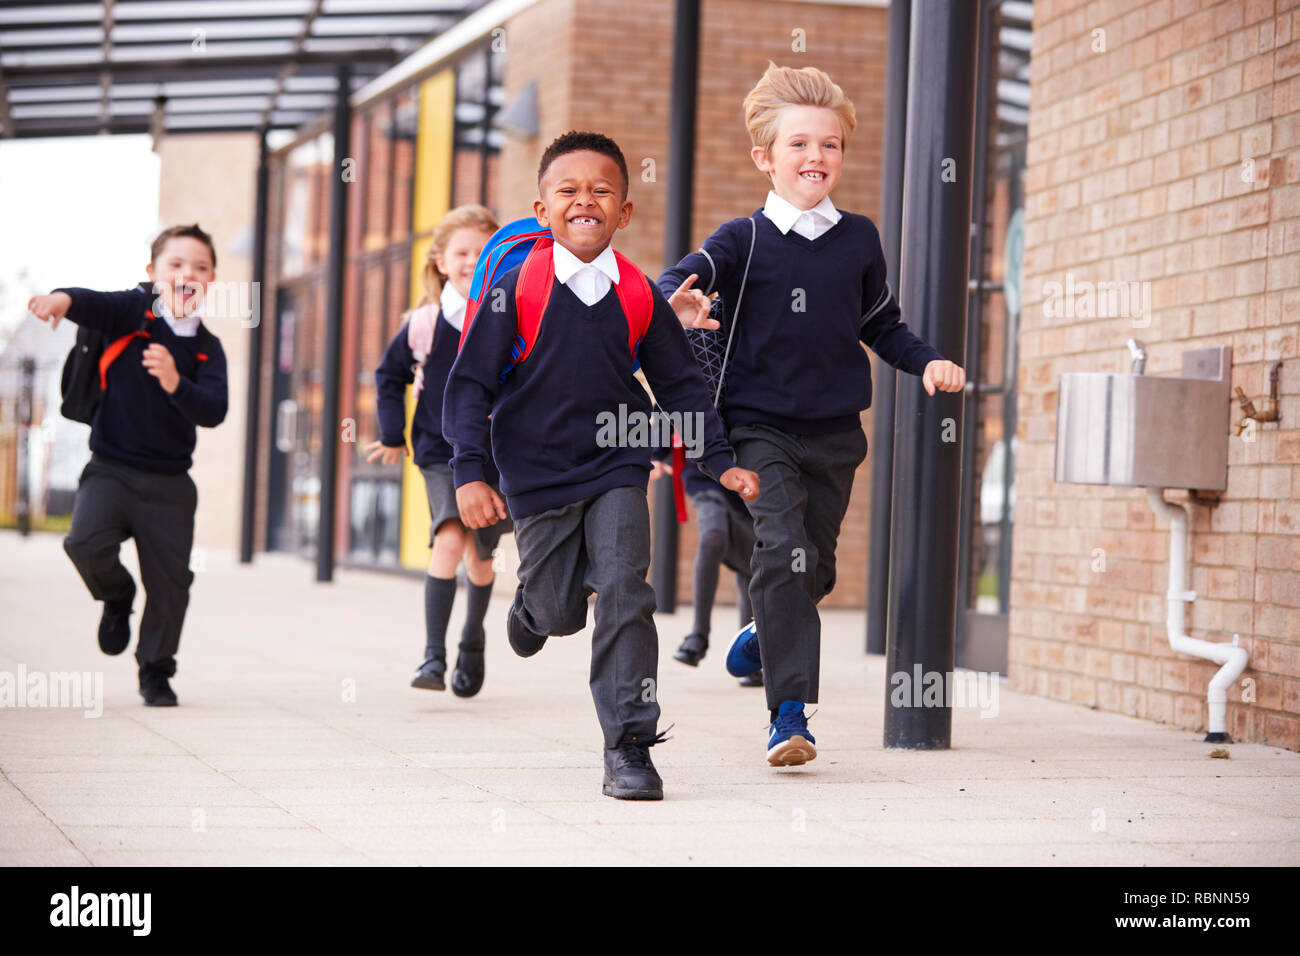 Happy primary school kids, wearing school uniforms and backpacks, running on a walkway outside their school building, front view, close up Stock Photo